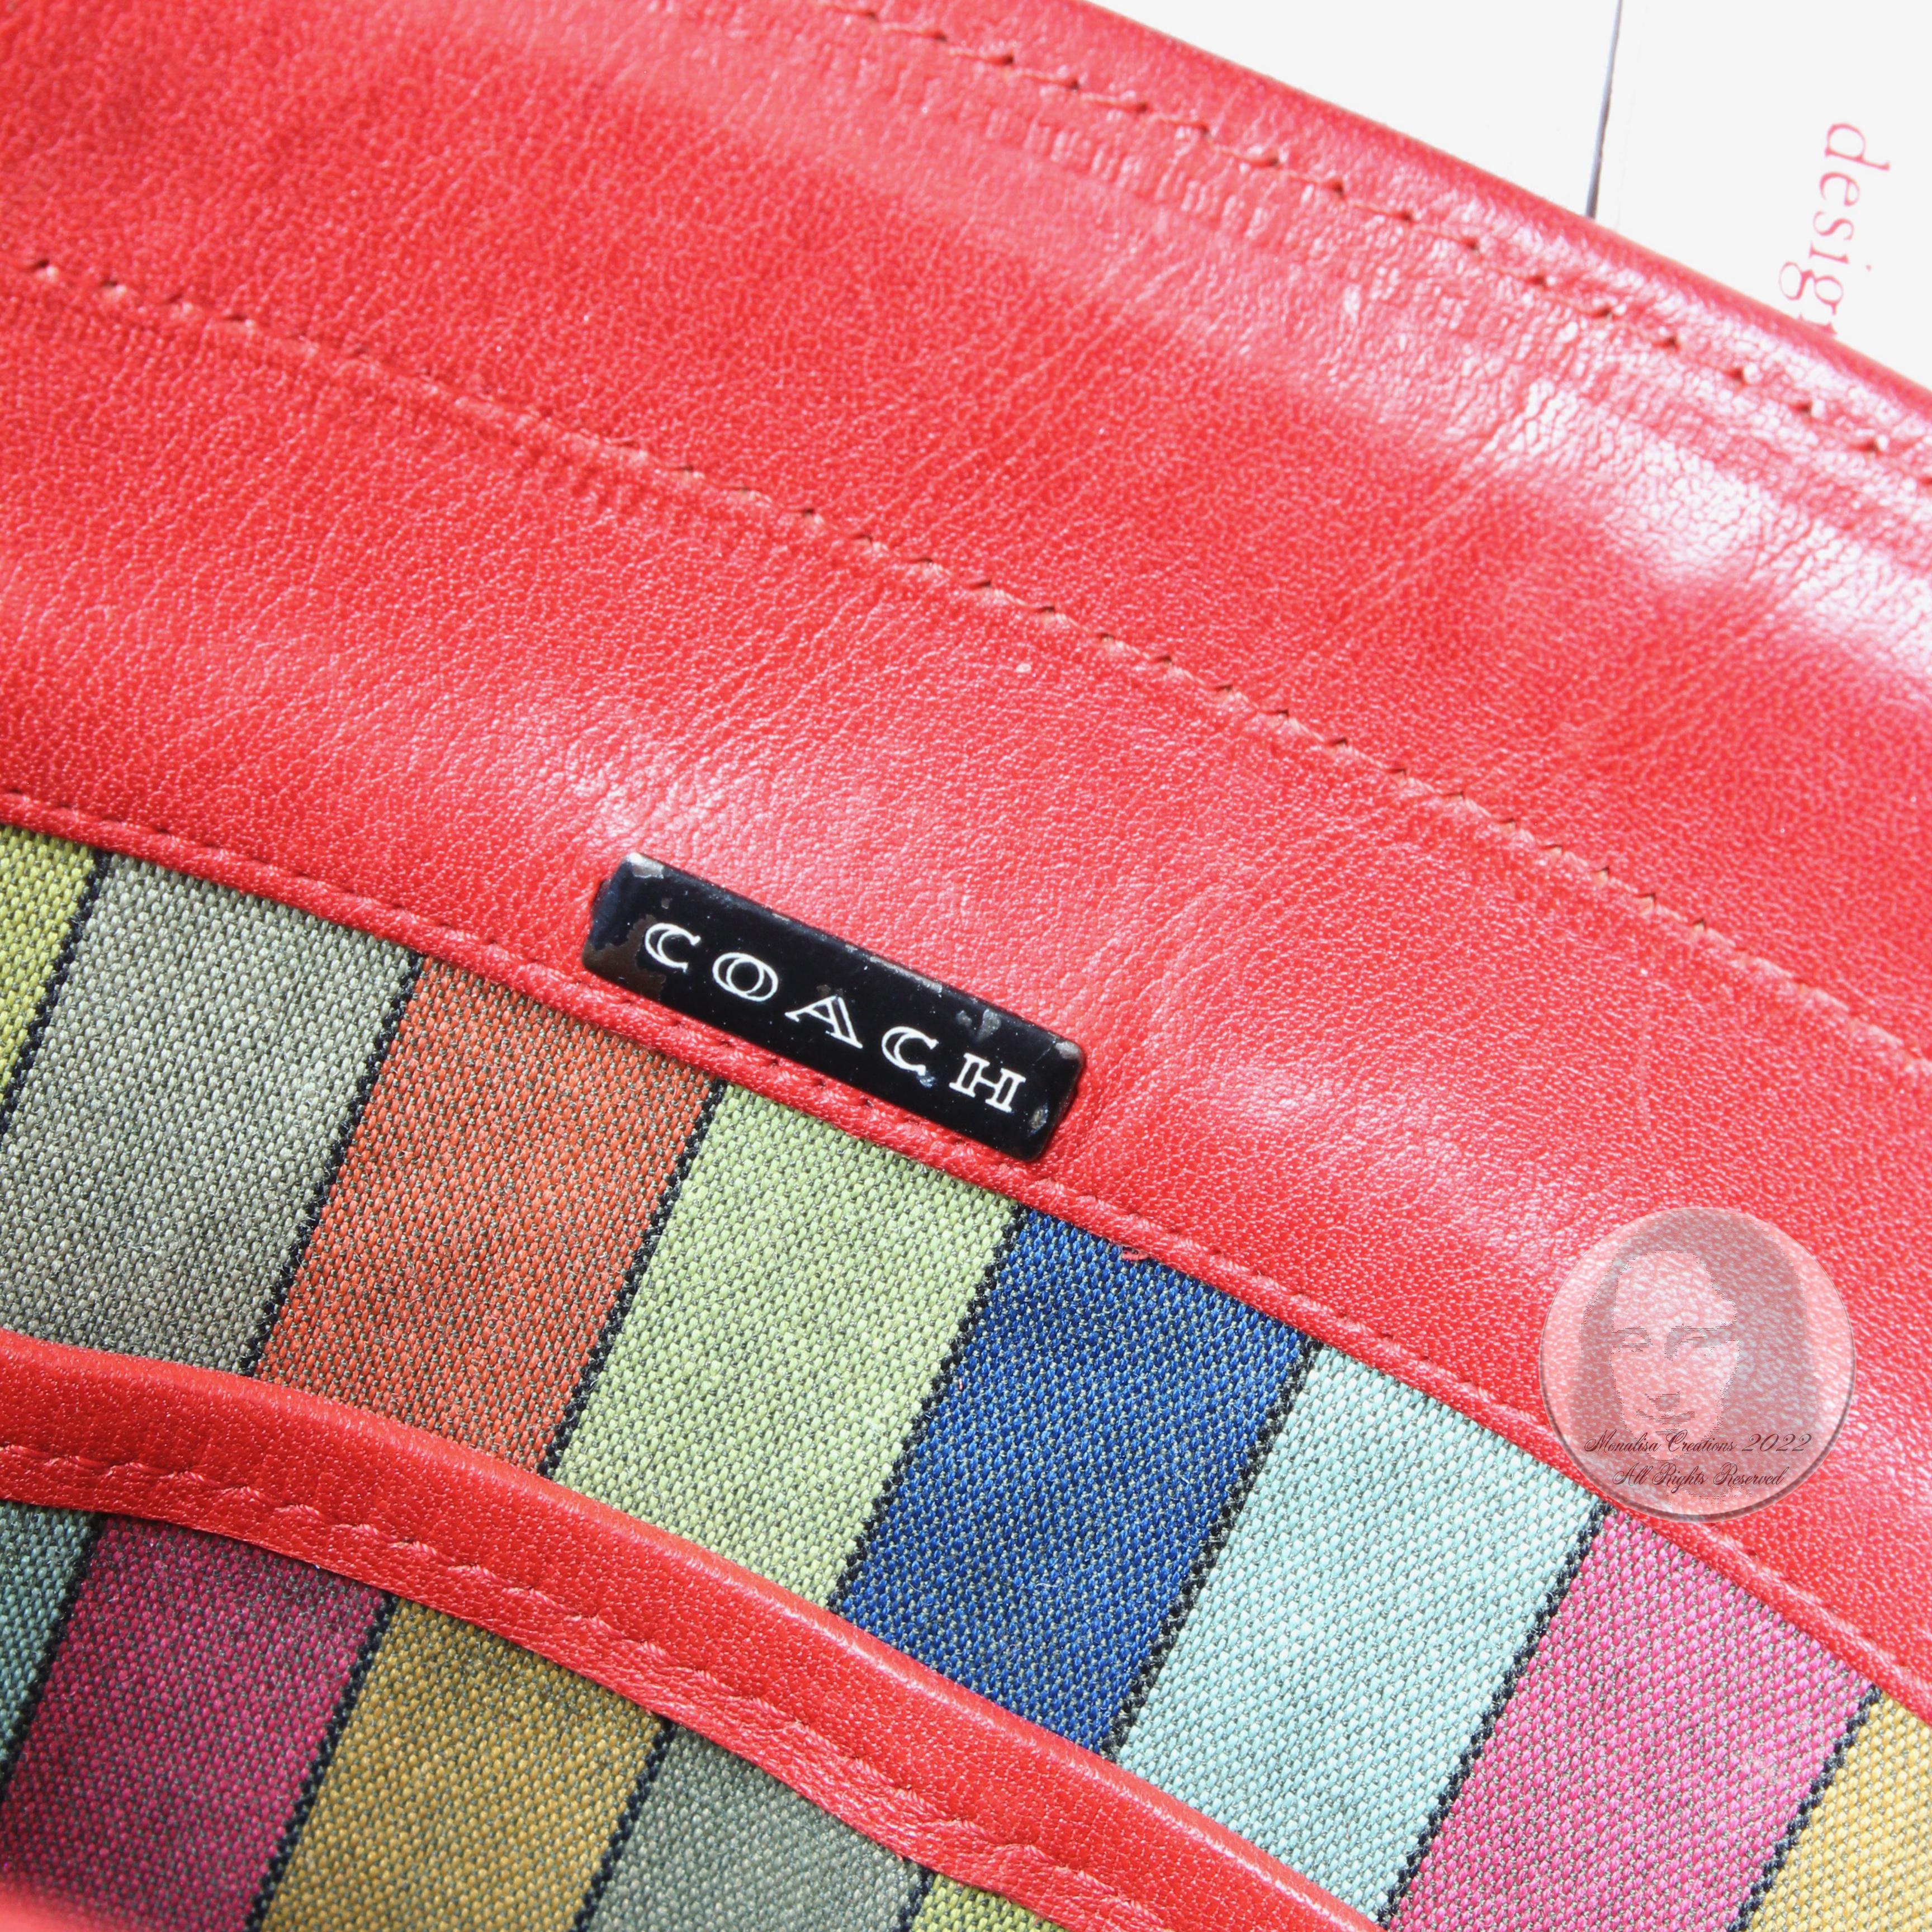 Bonnie Cashin for Coach Feed Bag Bucket Tote Red Leather Vintage 1960s Rare  5